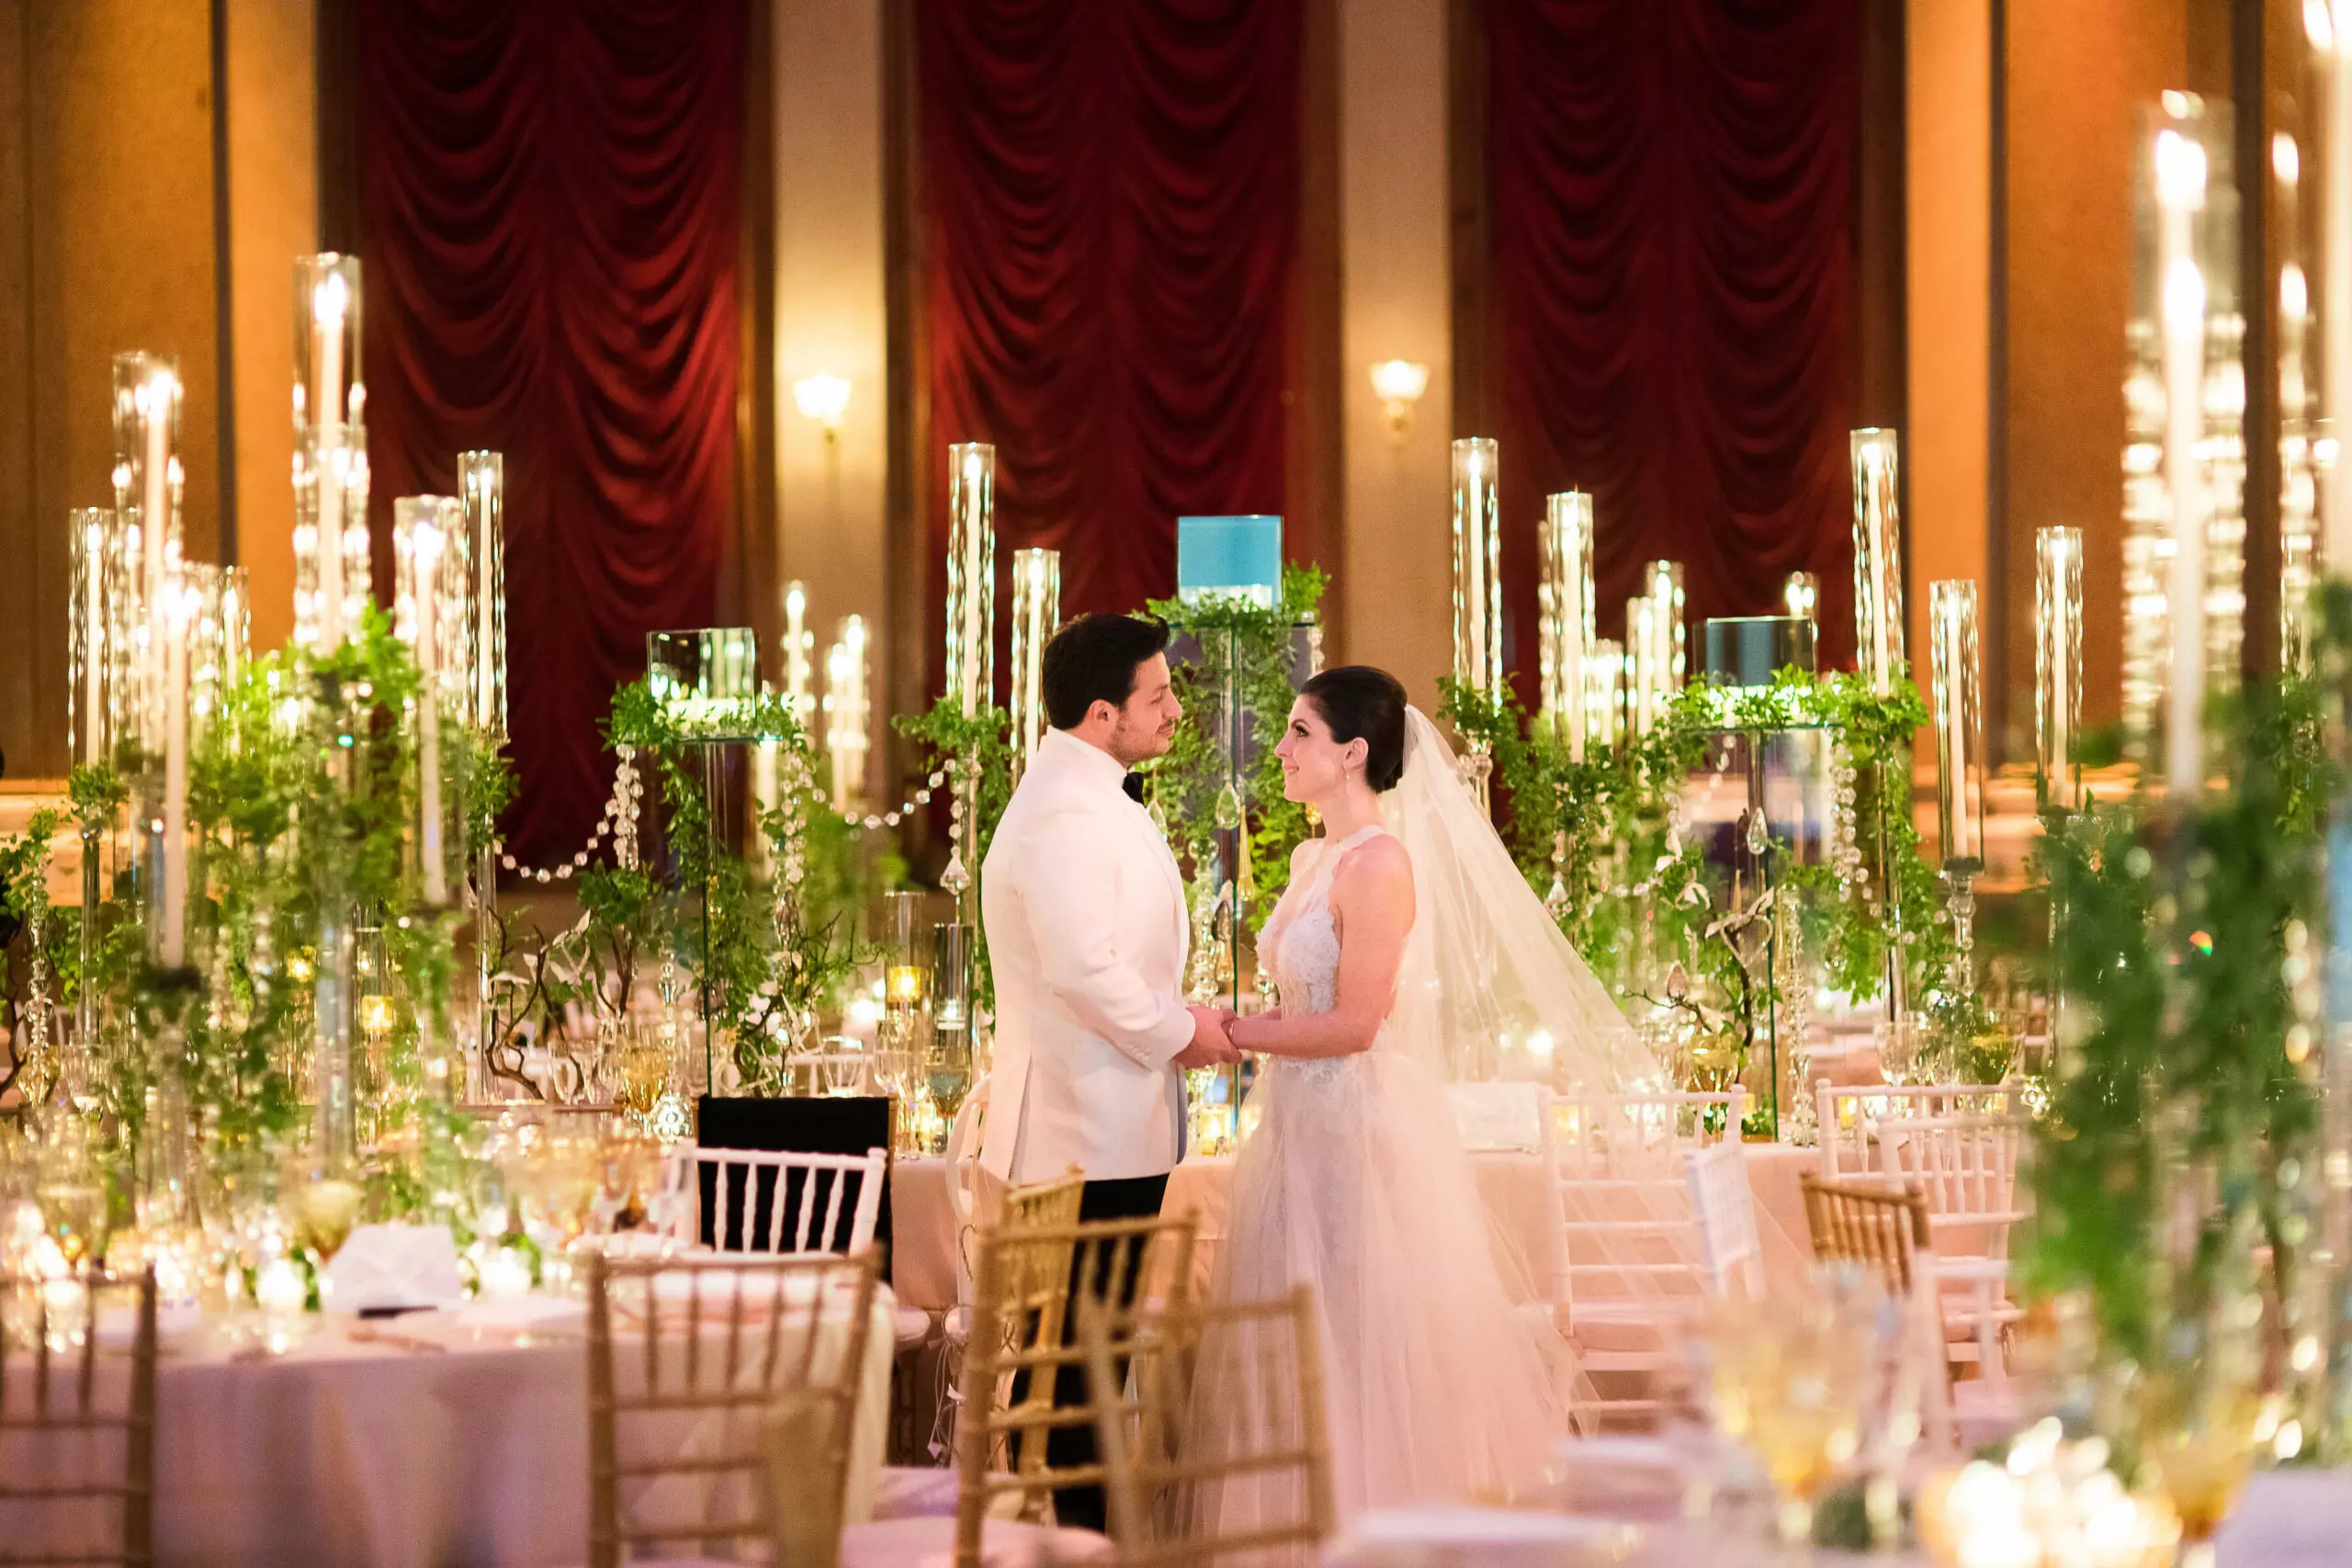 Brooklyn, New York wedding, decorated venue with bride and groom